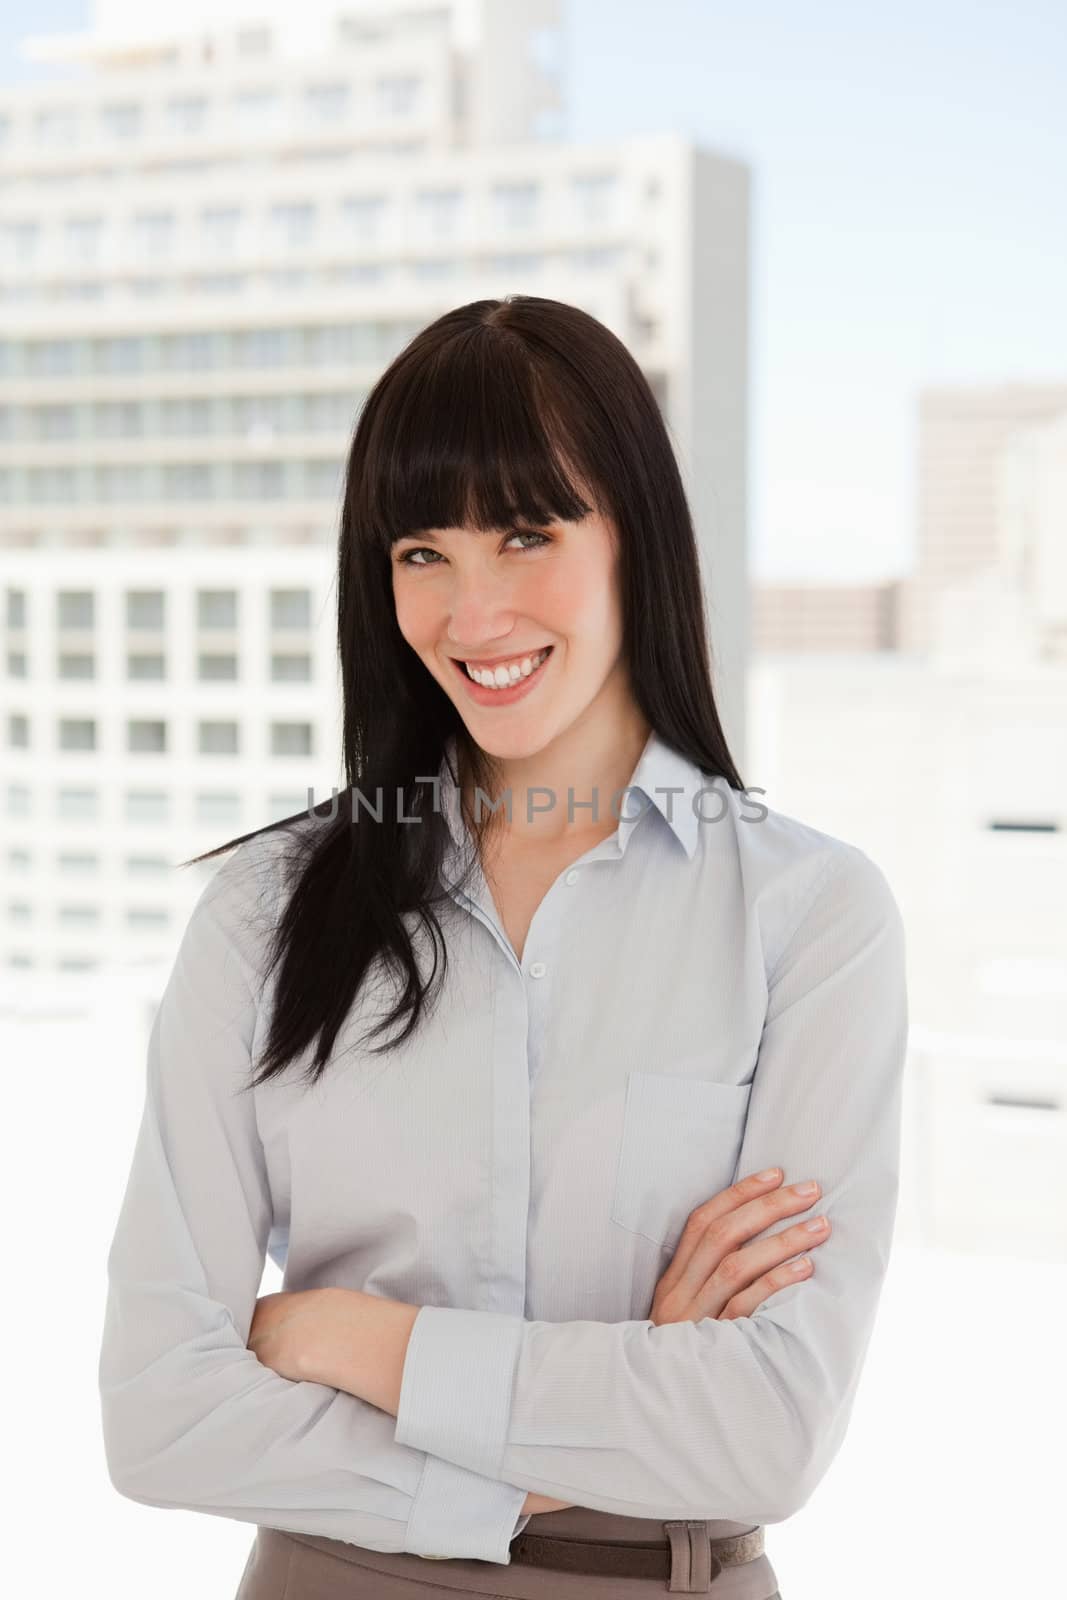 A business woman in her office smiling as she crosses her arms over